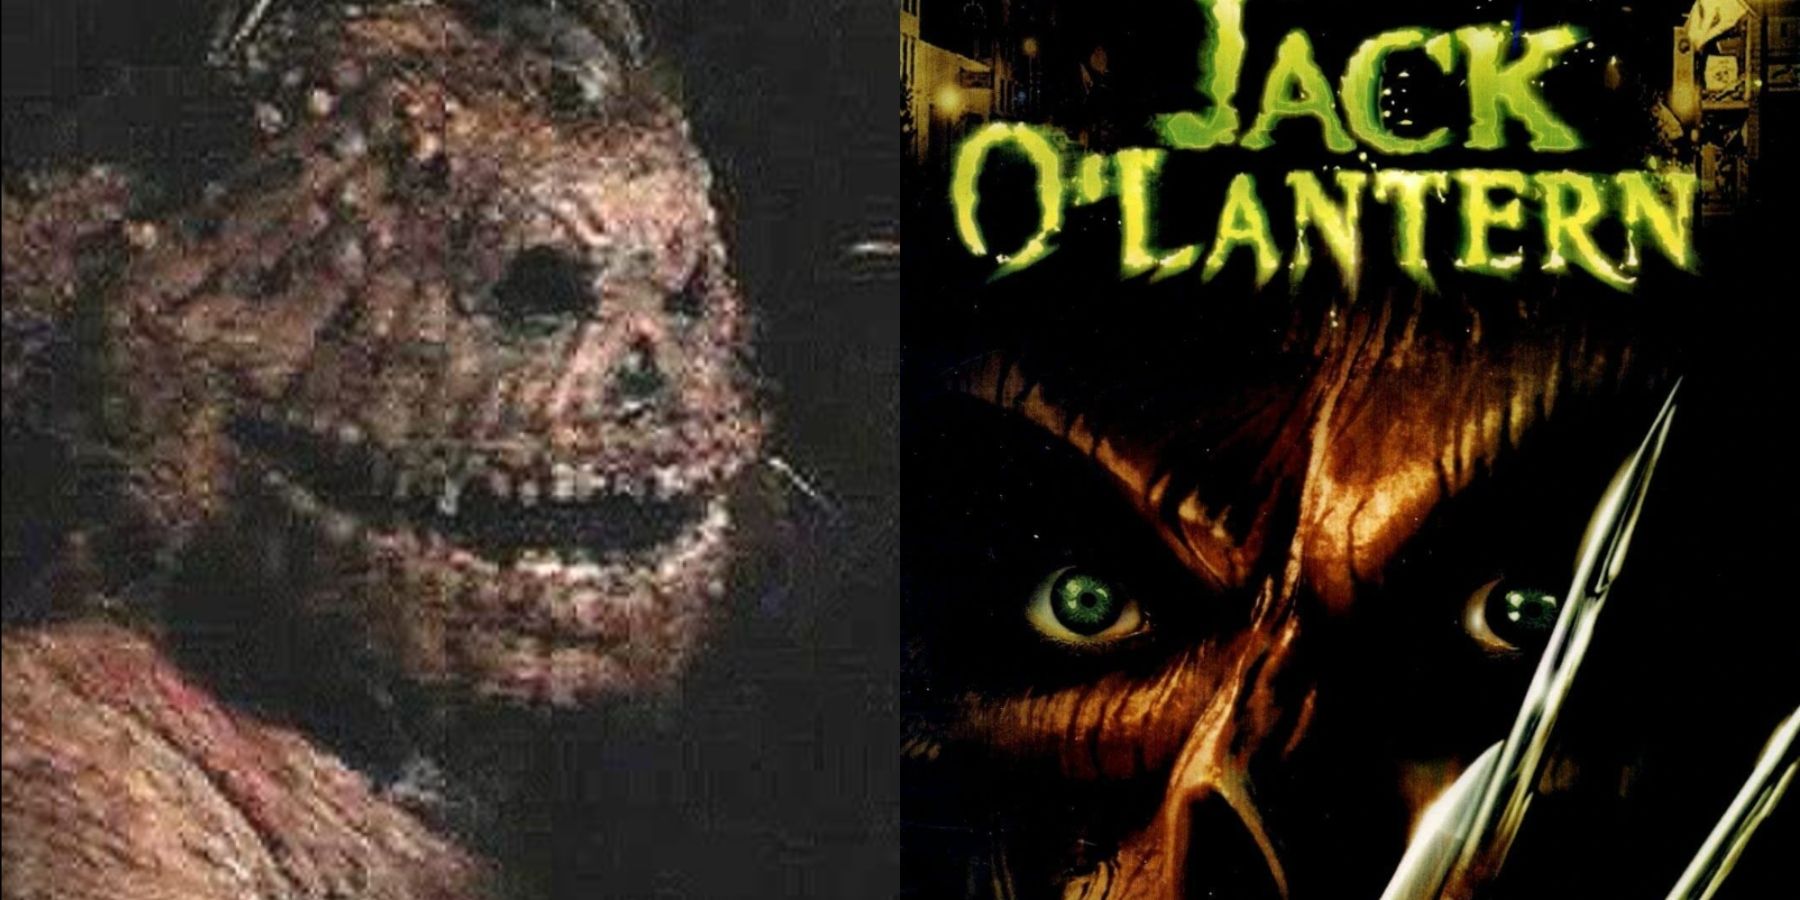 Split image of the monster in Jack O'Lantern and the movie's poster